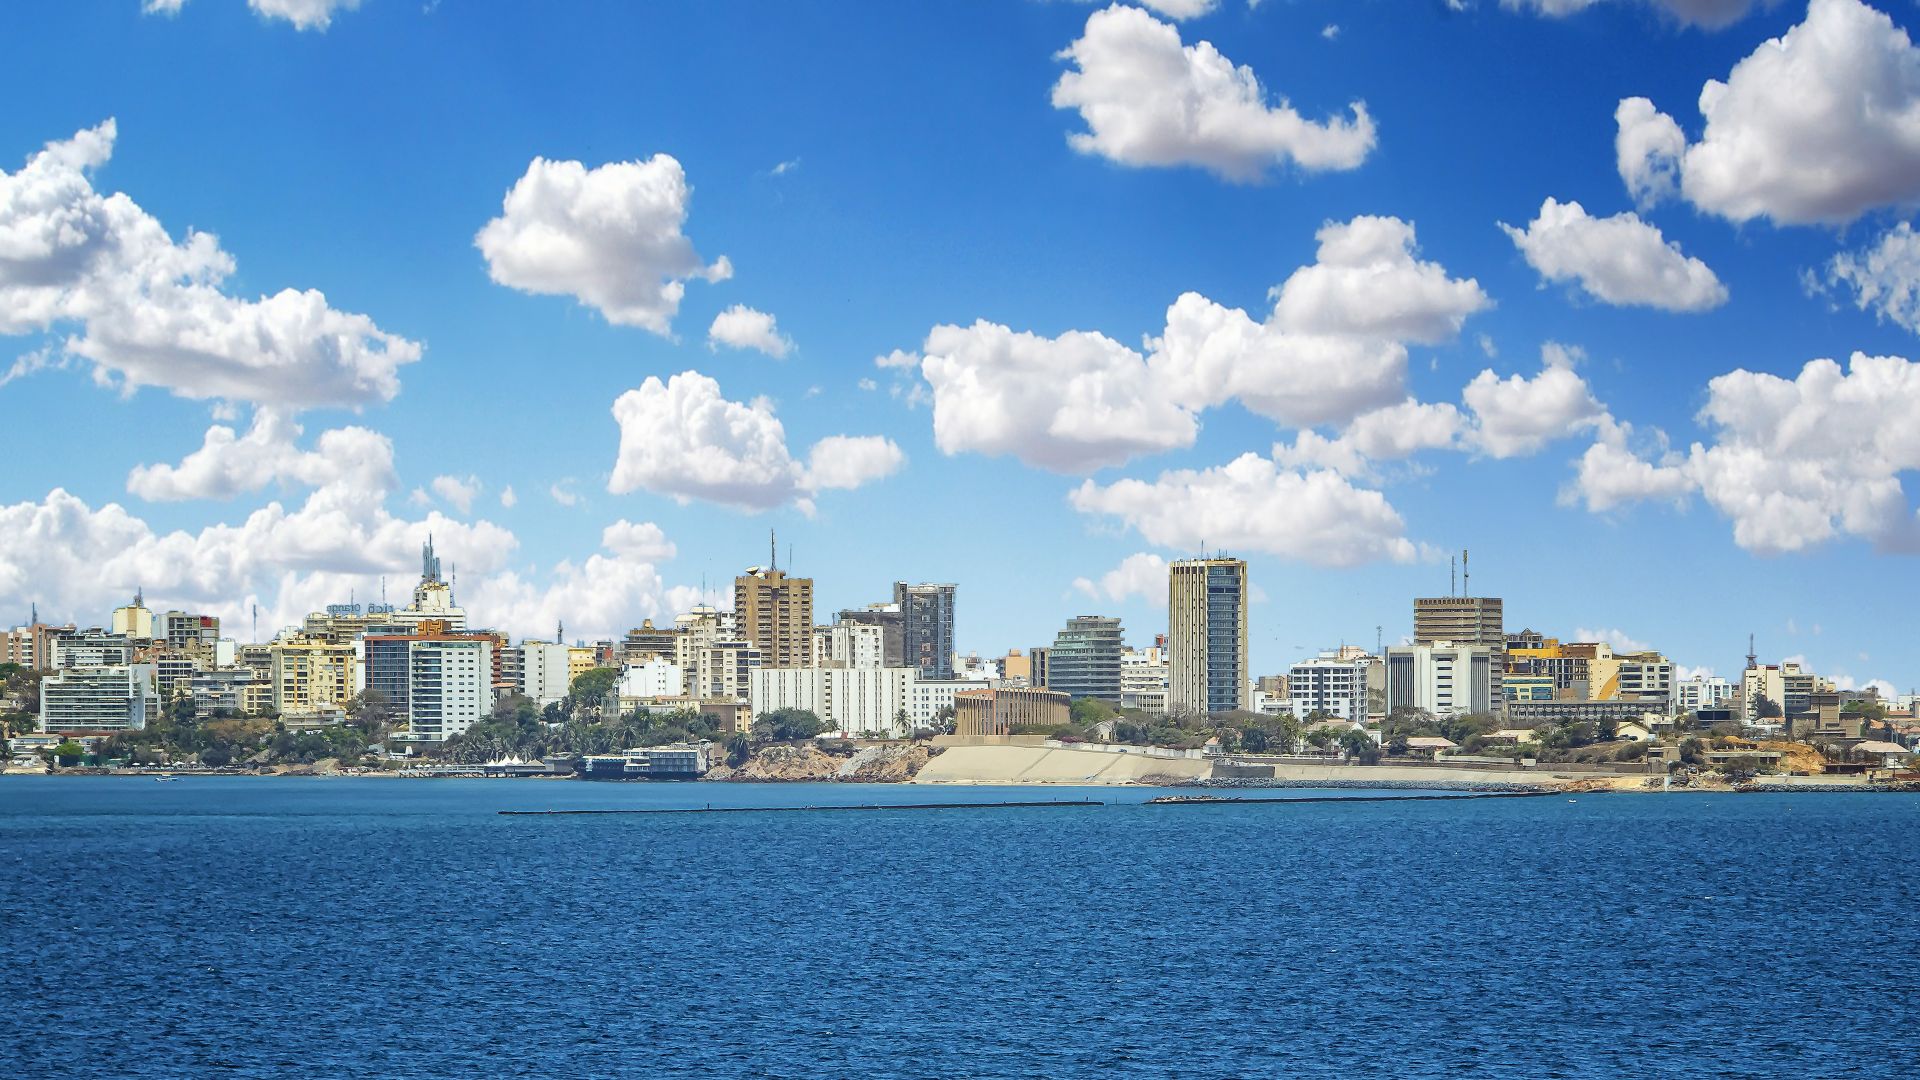 View of the Senegal capital of Dakar, Africa. It is a city panorama taken from a boat. There are large modern buildings and a blue sky with clouds. It's summer.